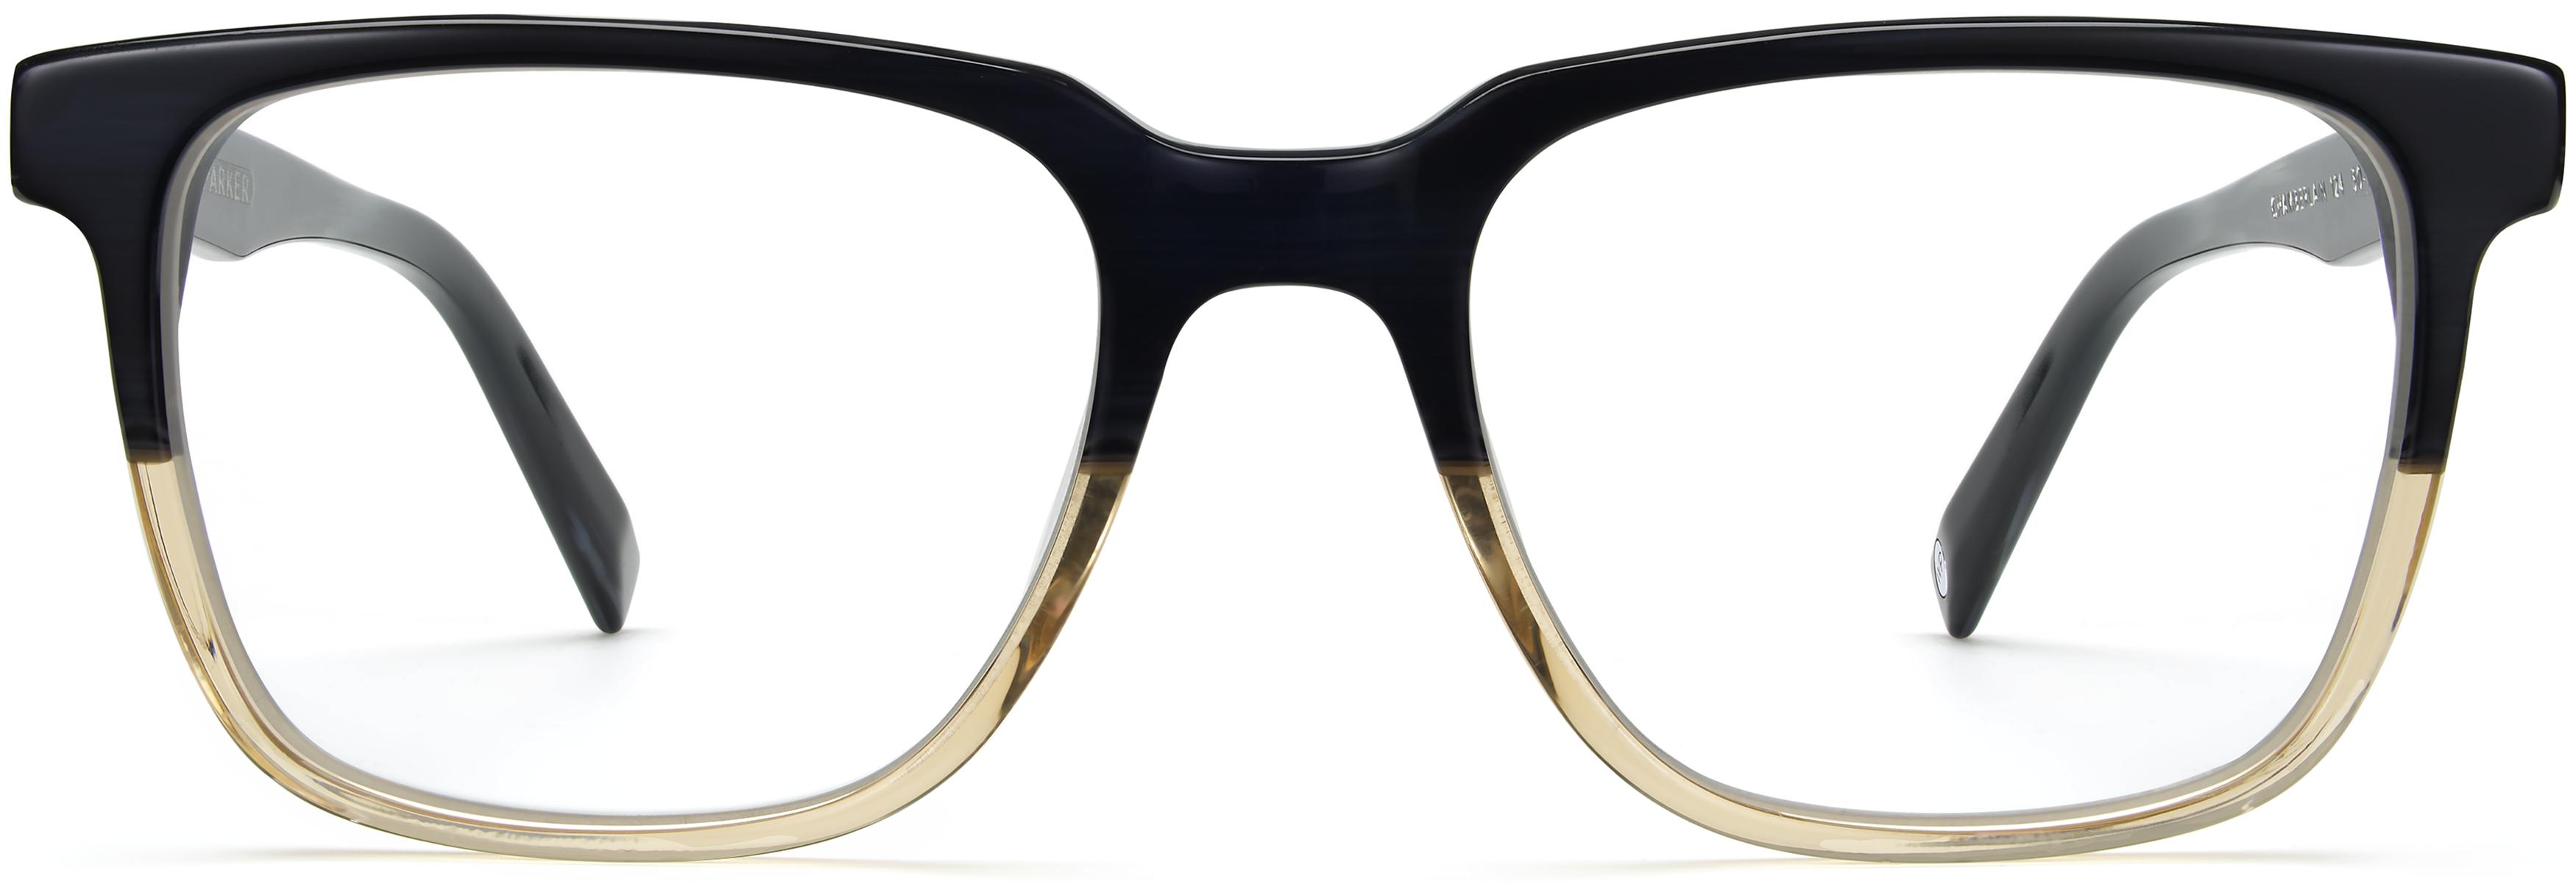 Chamberlain Eyeglasses In Mission Clay Fade Warby Parker